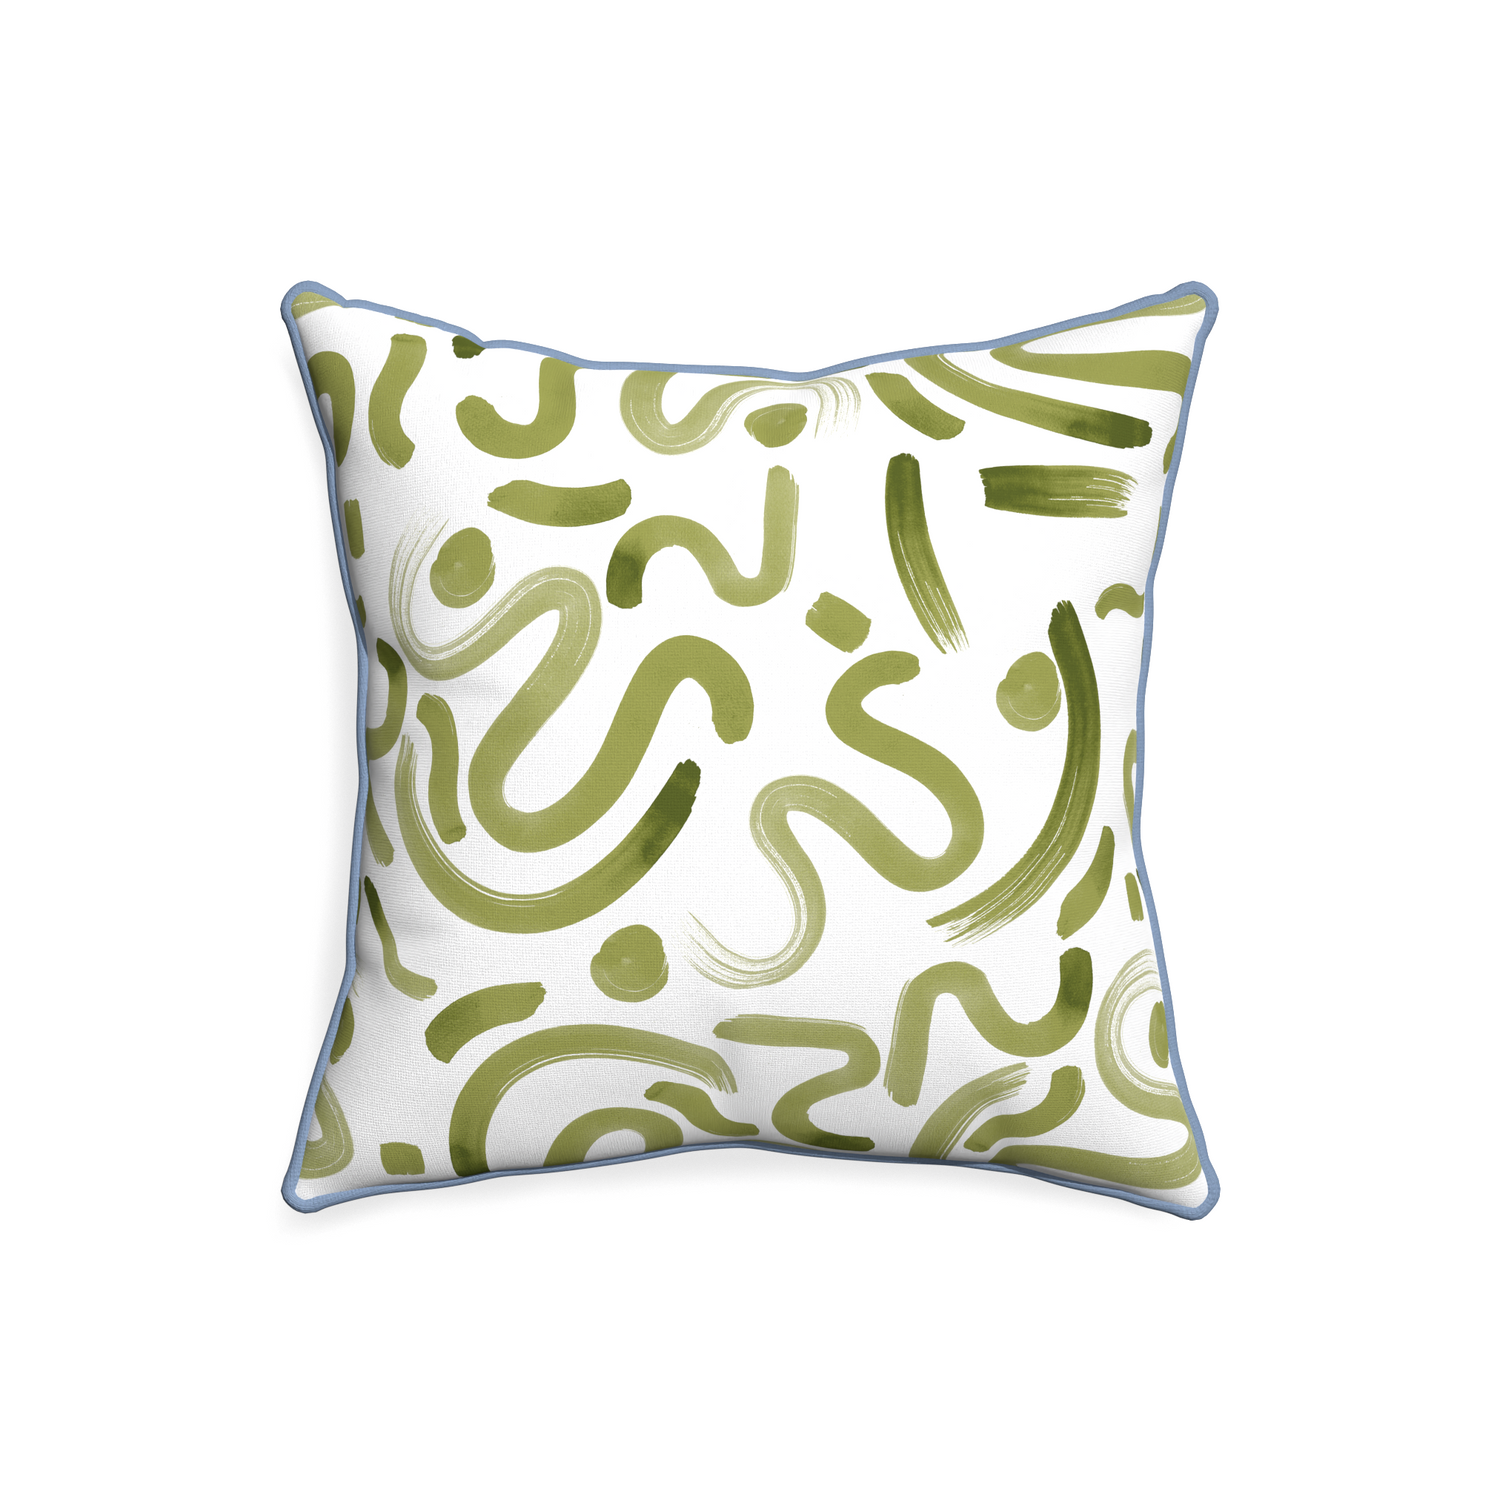 20-square hockney moss custom pillow with sky piping on white background